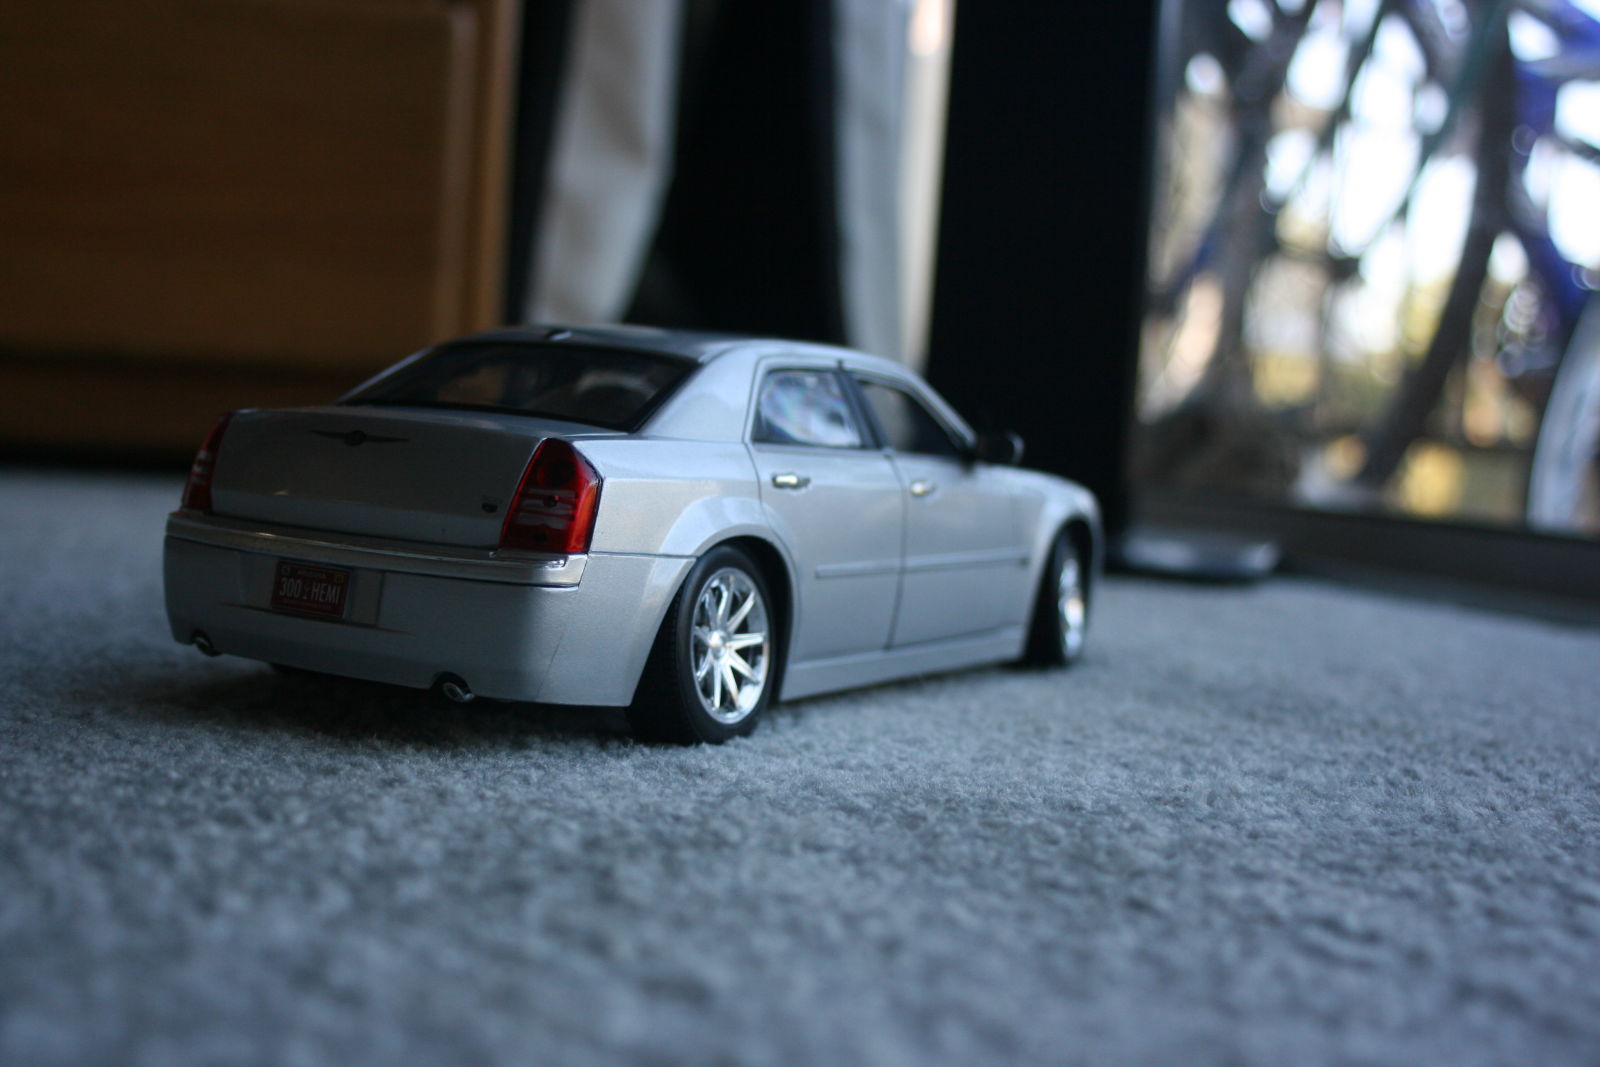 Illustration for article titled Live and Let Diecast: Some 1:18 scale cars